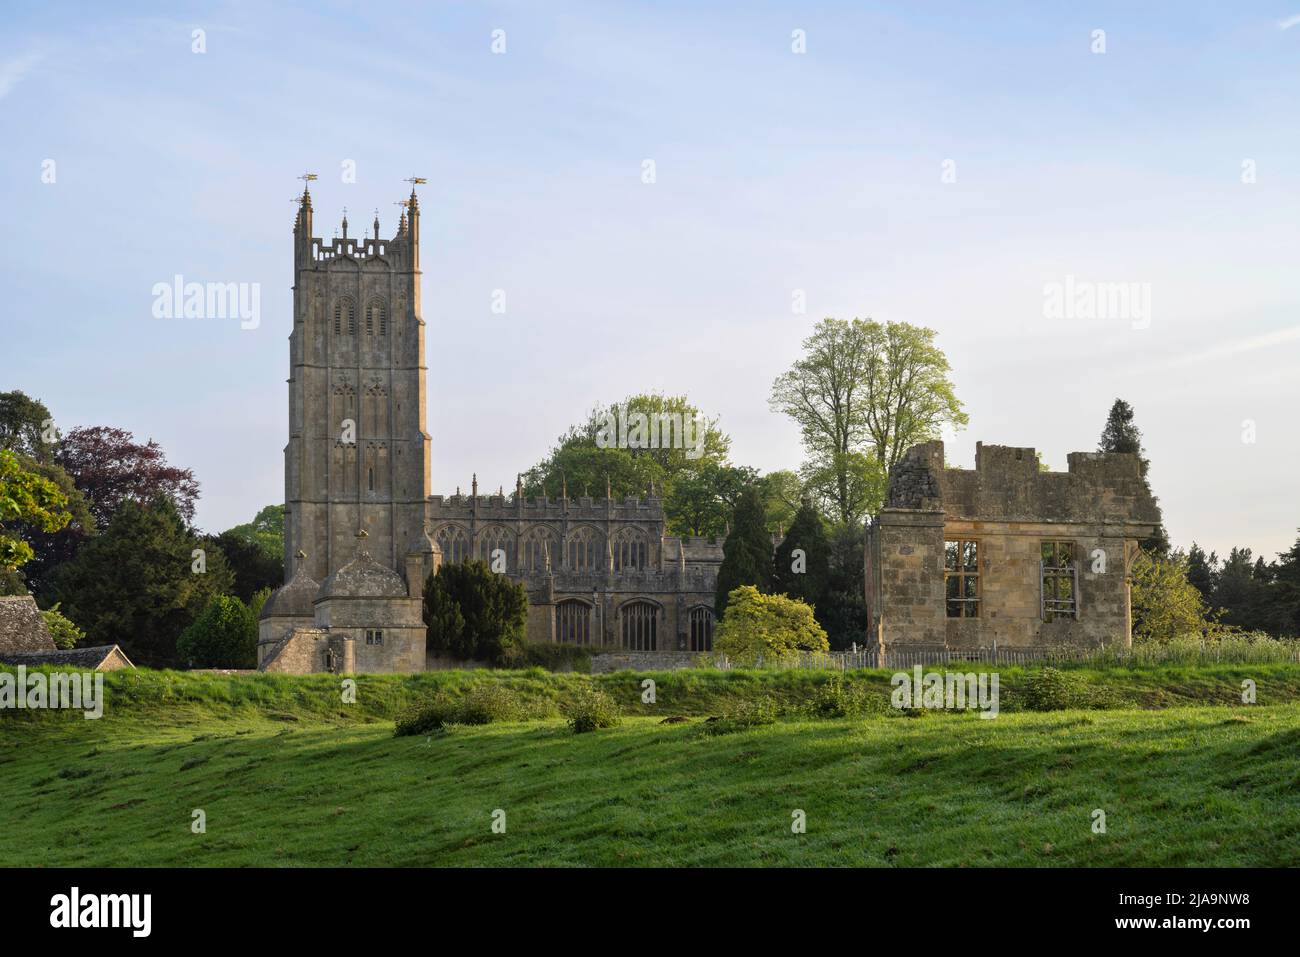 Kirche und Ruinen in Chipping Campden, Cotswolds, England. Stockfoto